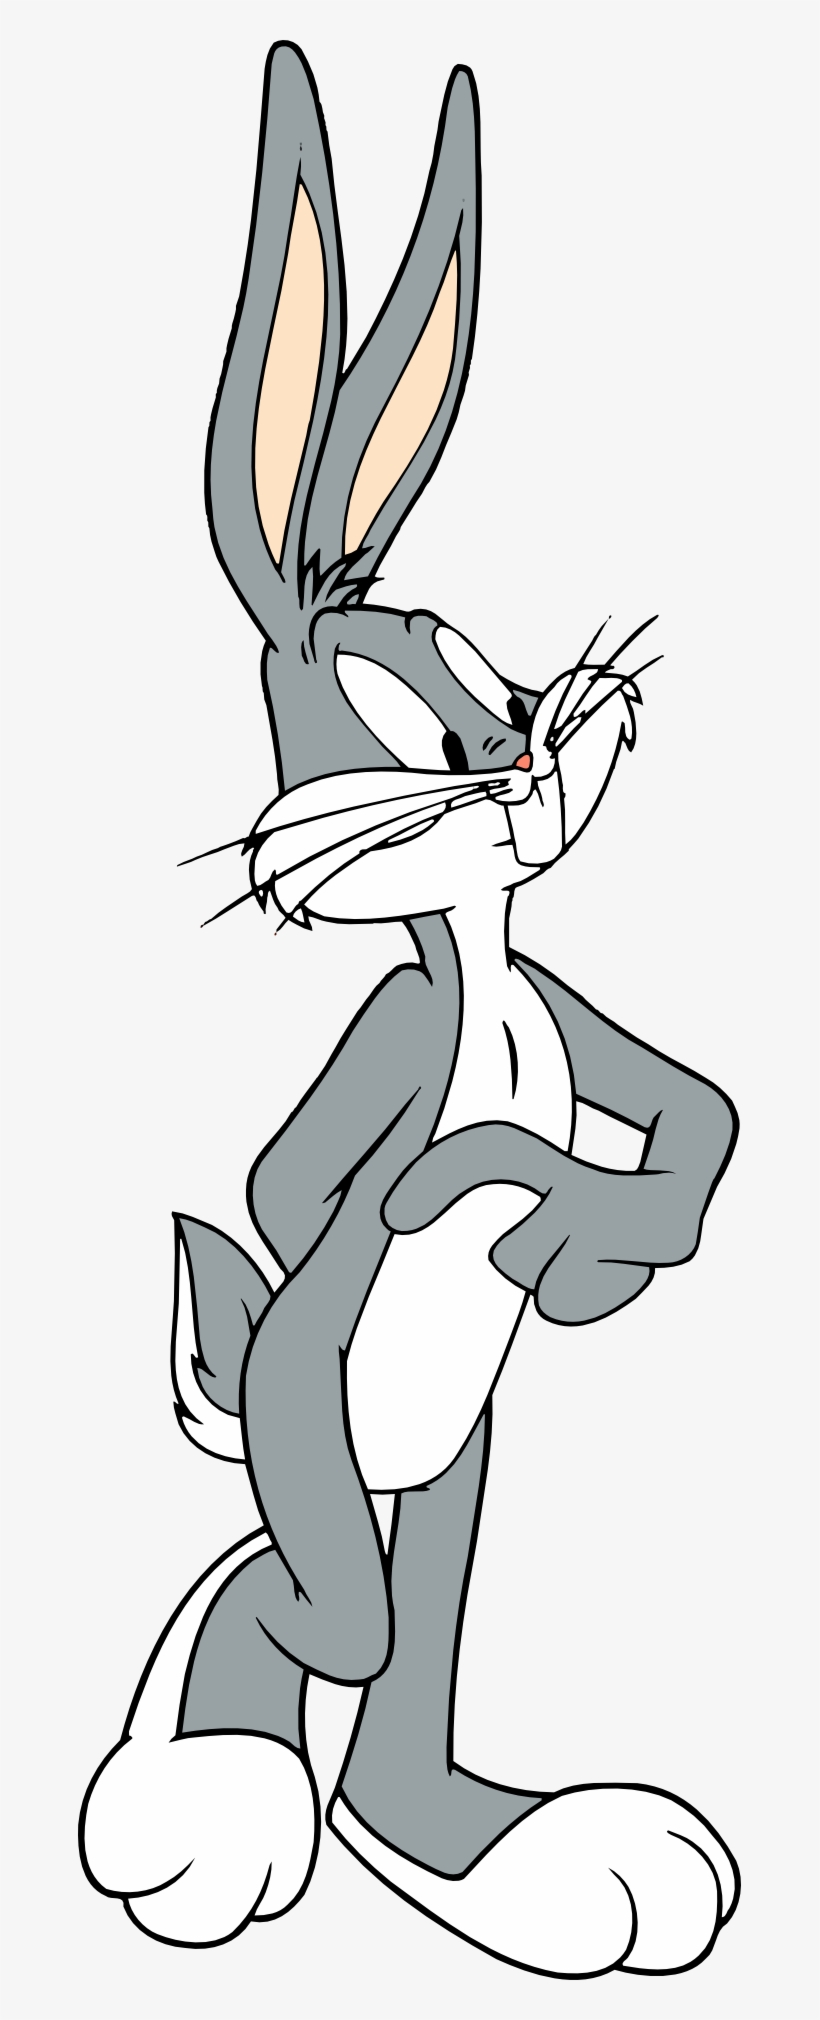 Bugs Bunny Begins To Flirt While Not Wearing His Gloves - Багз Банни Стикер, transparent png #8811619